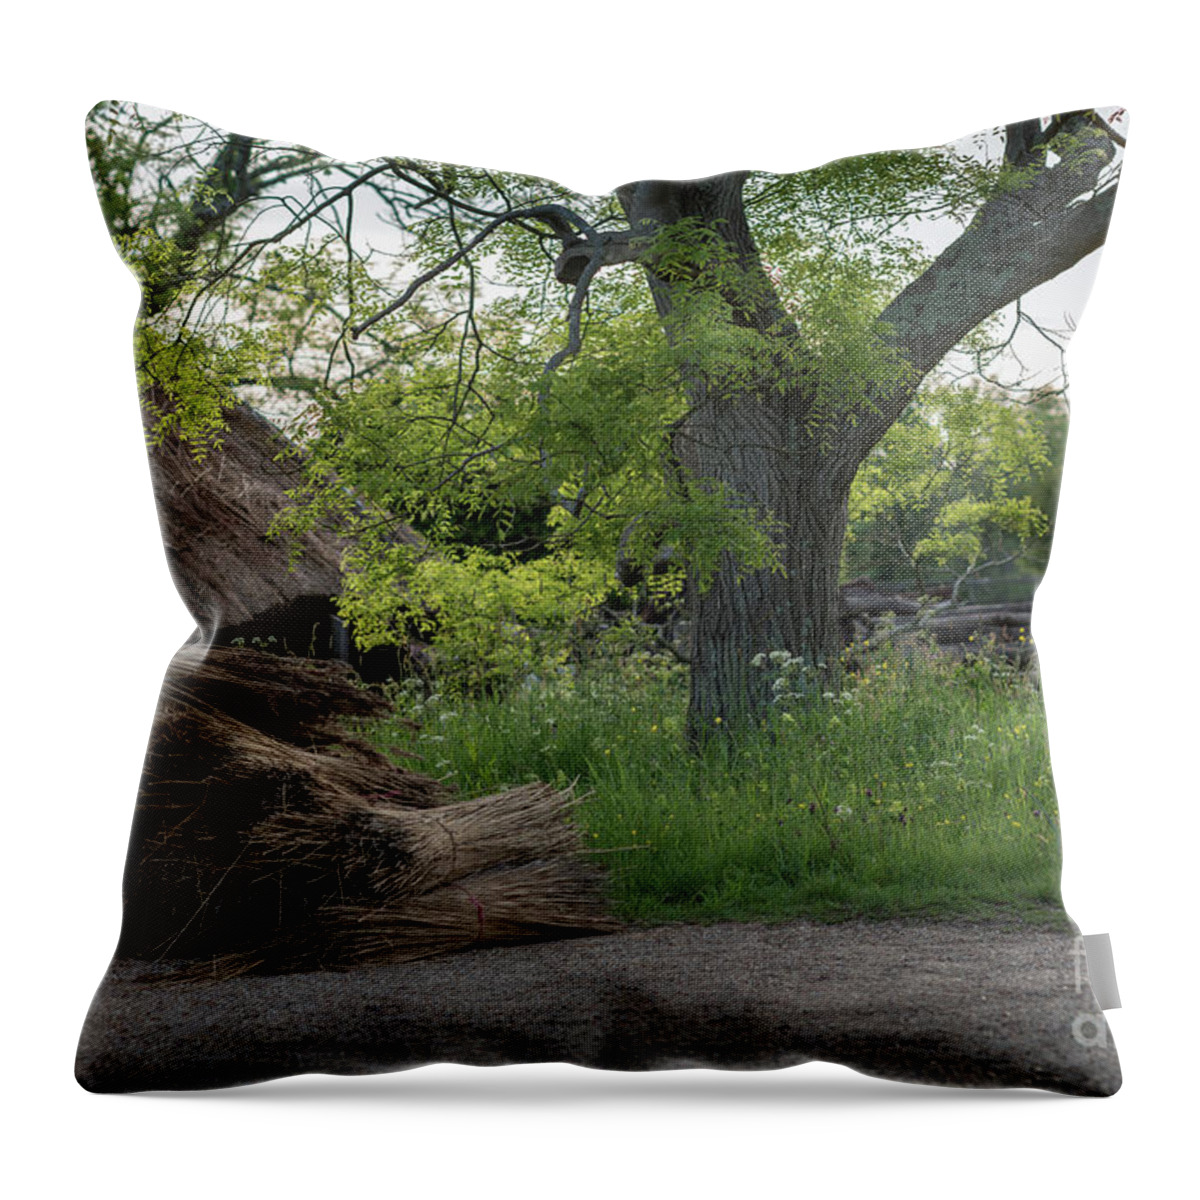 Thatched Throw Pillow featuring the photograph The Thatched Roof, Great Dixter by Perry Rodriguez